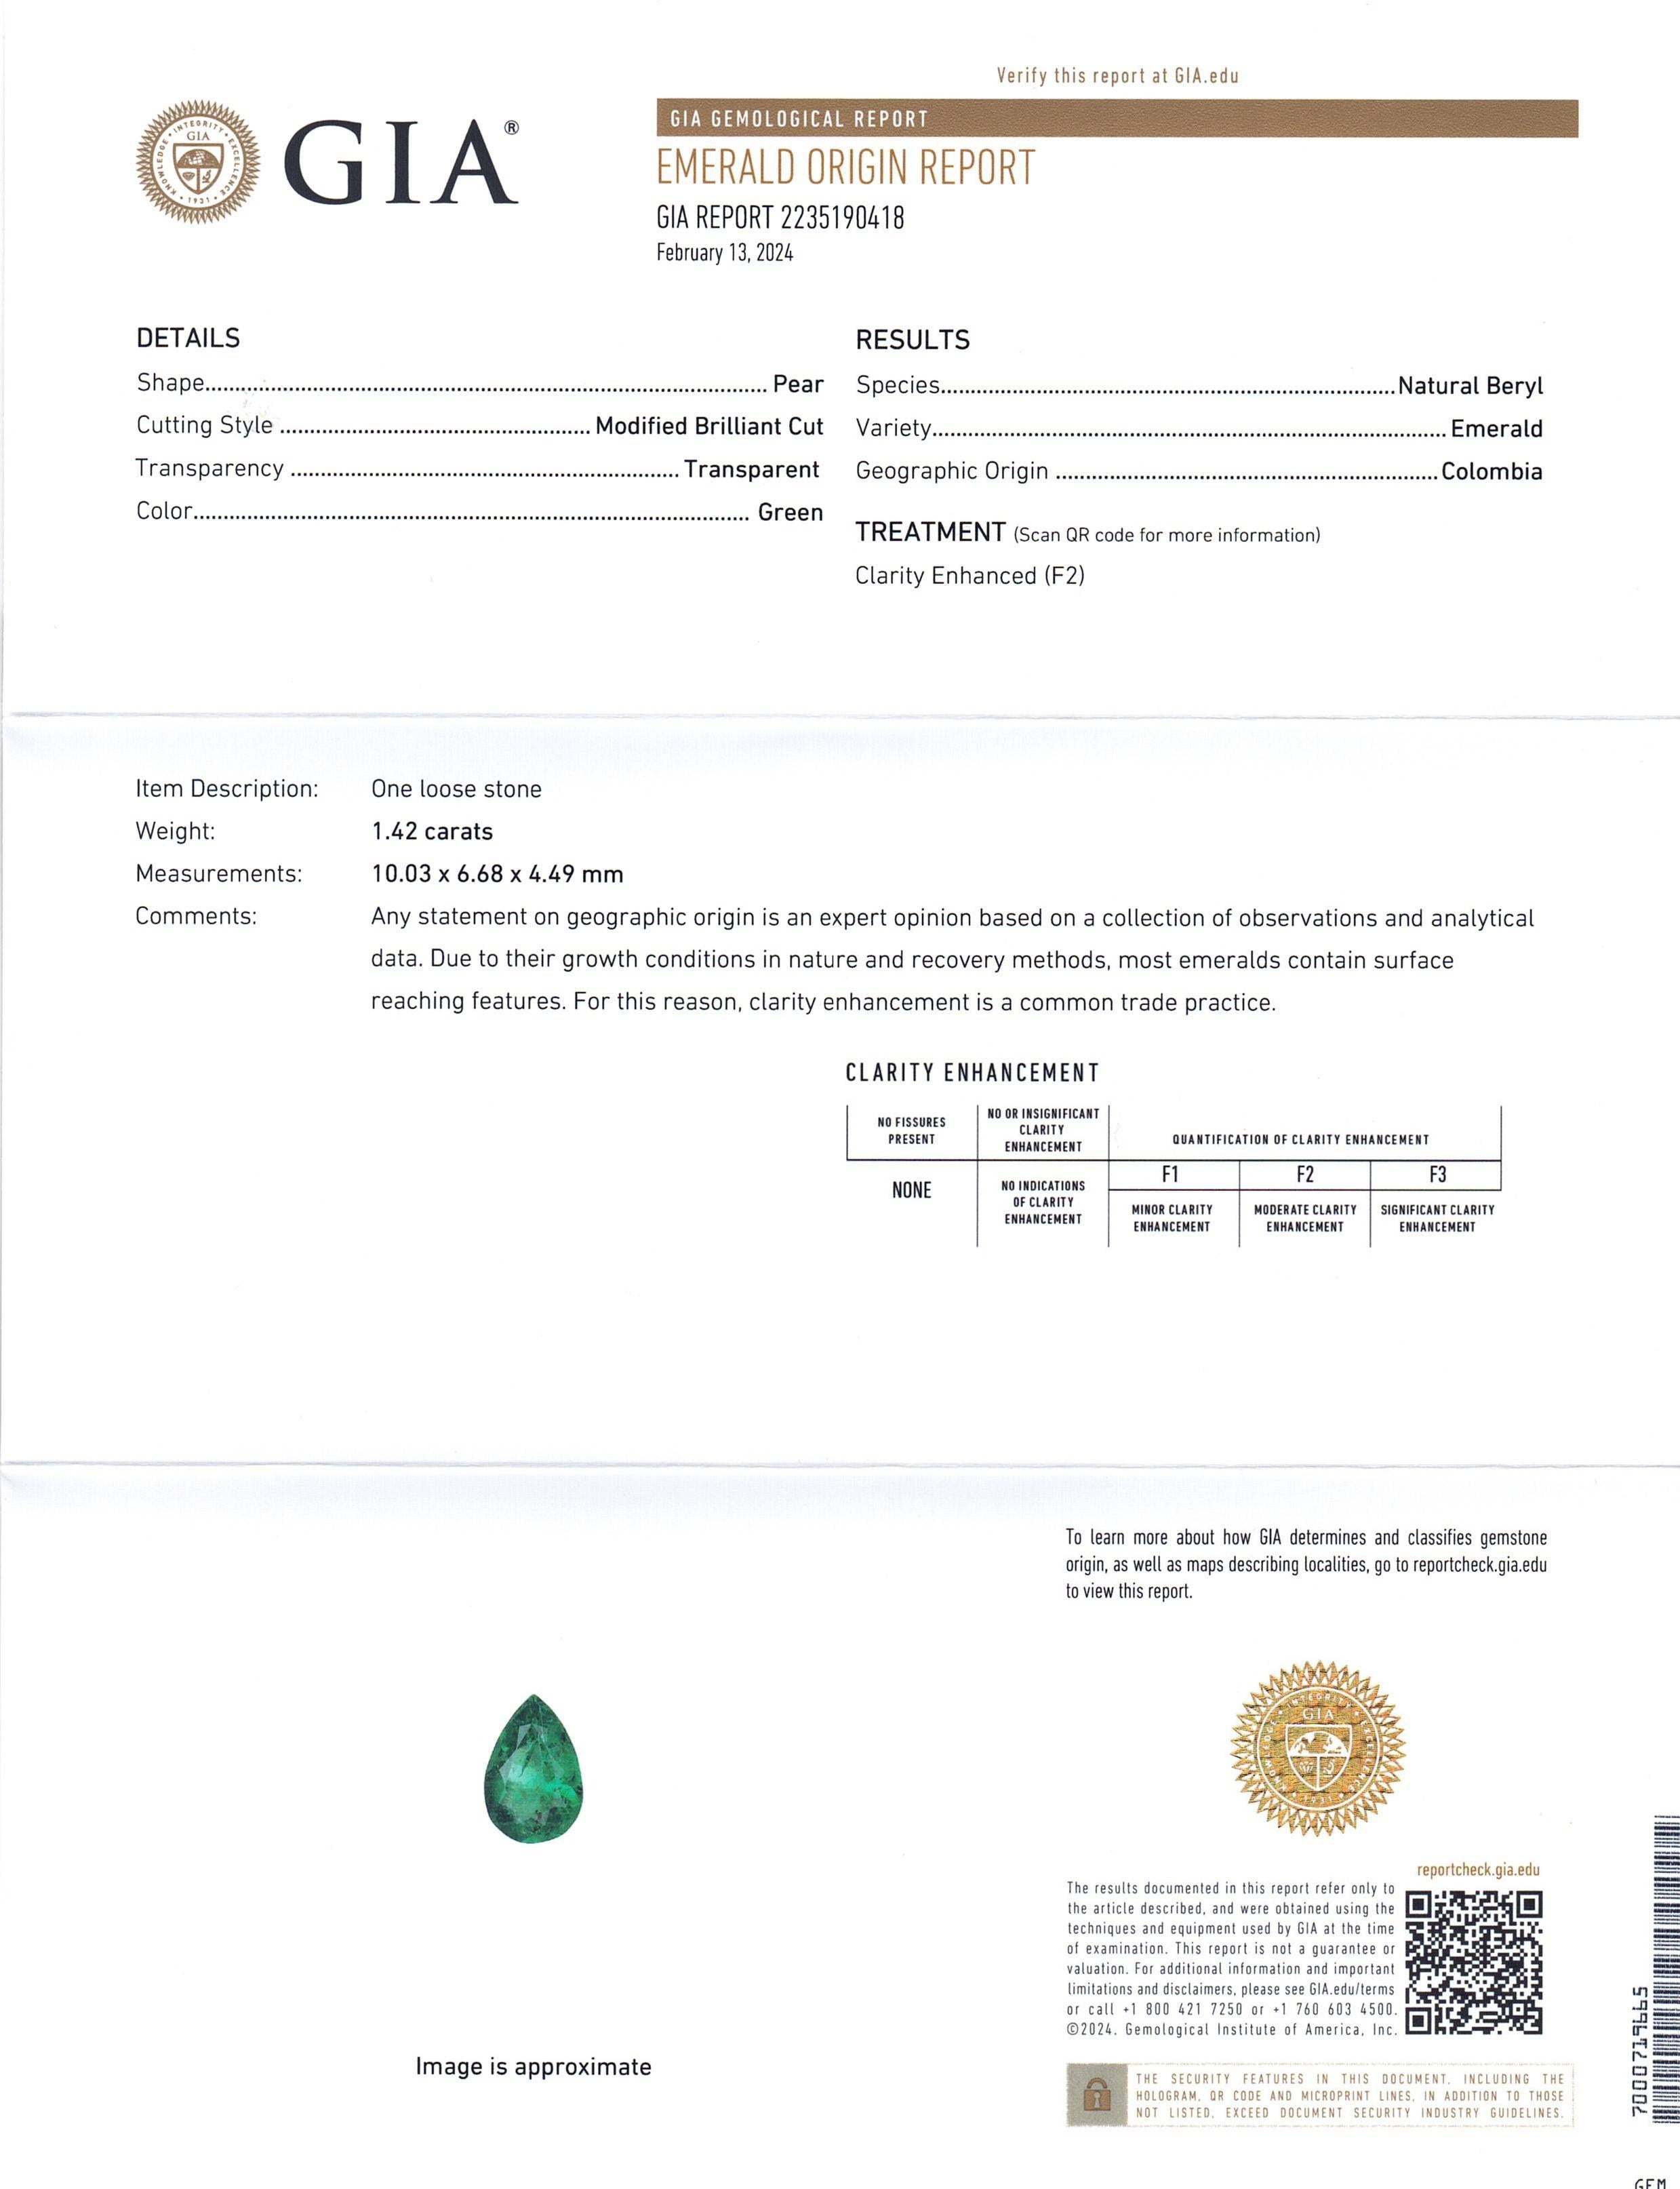 This is a stunning GIA Certified Emerald 


The GIA report reads as follows:

GIA Report Number: 2235190418
Shape: Pear
Cutting Style: Modified Brilliant Cut
Cutting Style: Crown: 
Cutting Style: Pavilion: 
Transparency: Transparent
Colour: